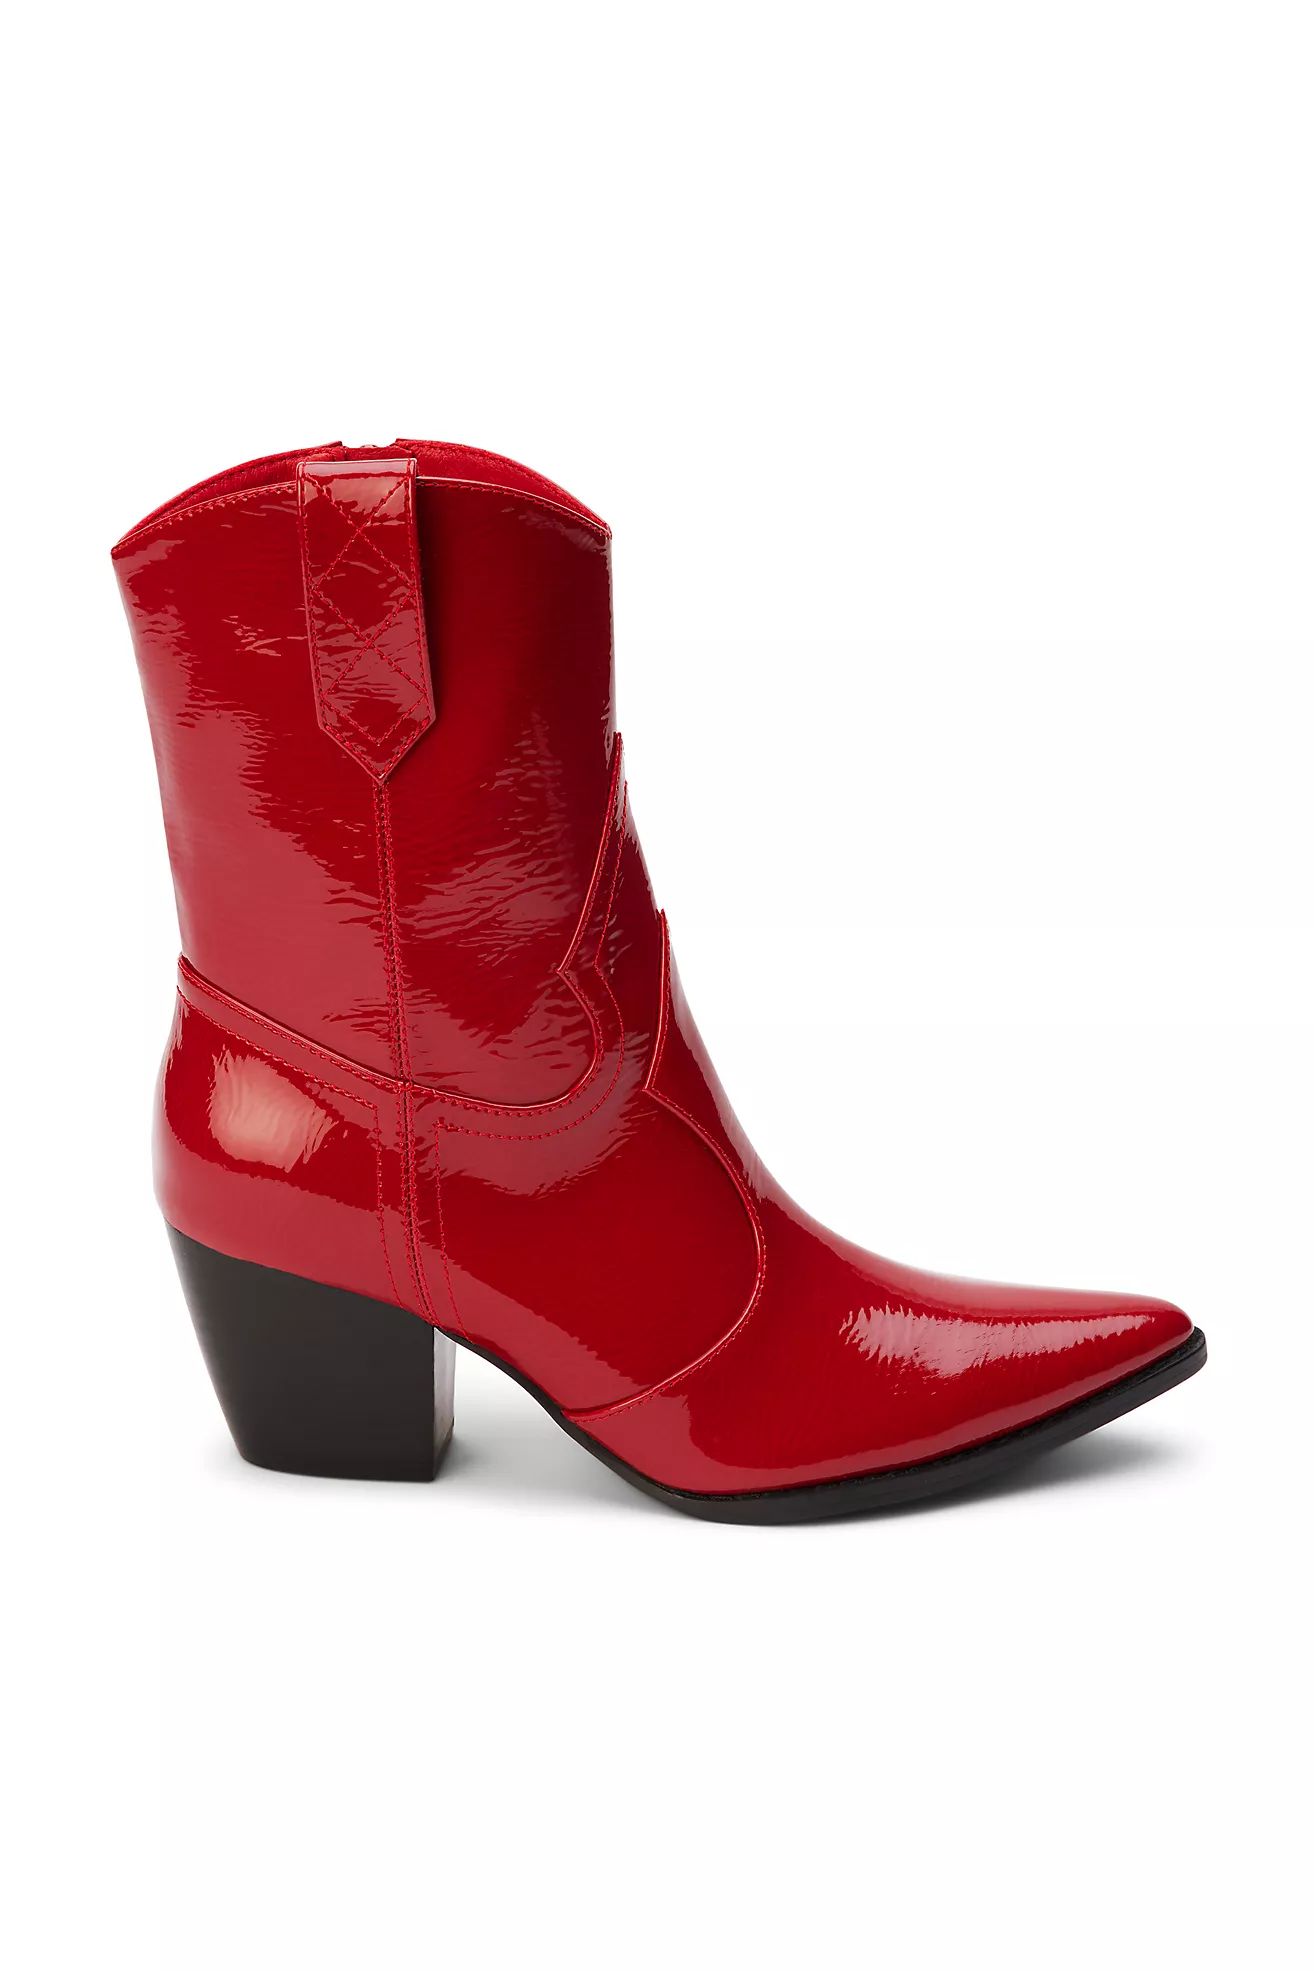 Matisse Bambi Western Boots | Anthropologie (US)